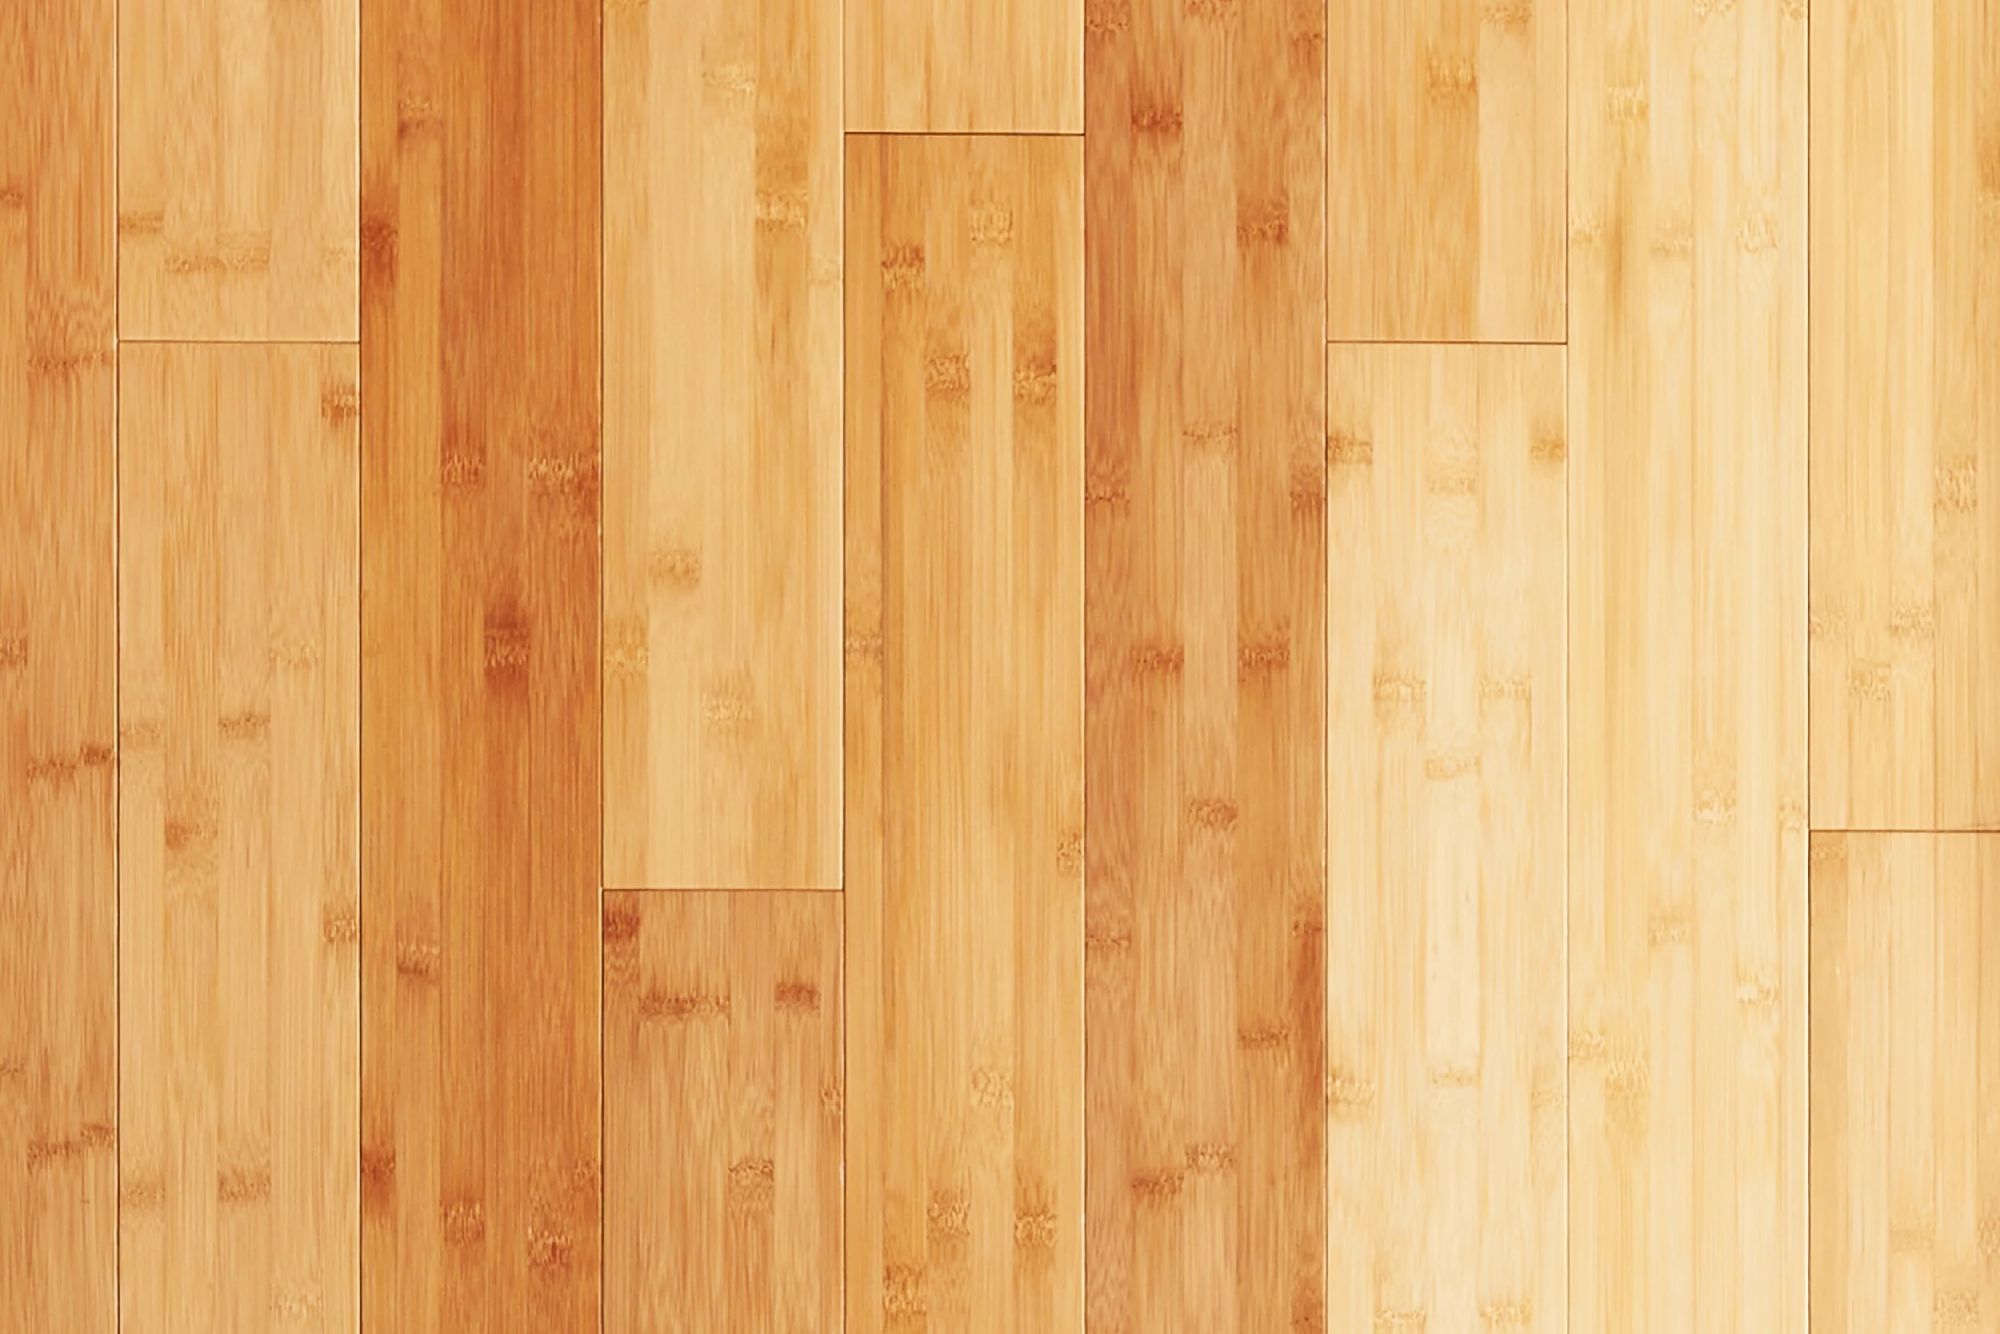 Overhead view of a clean bamboo floor